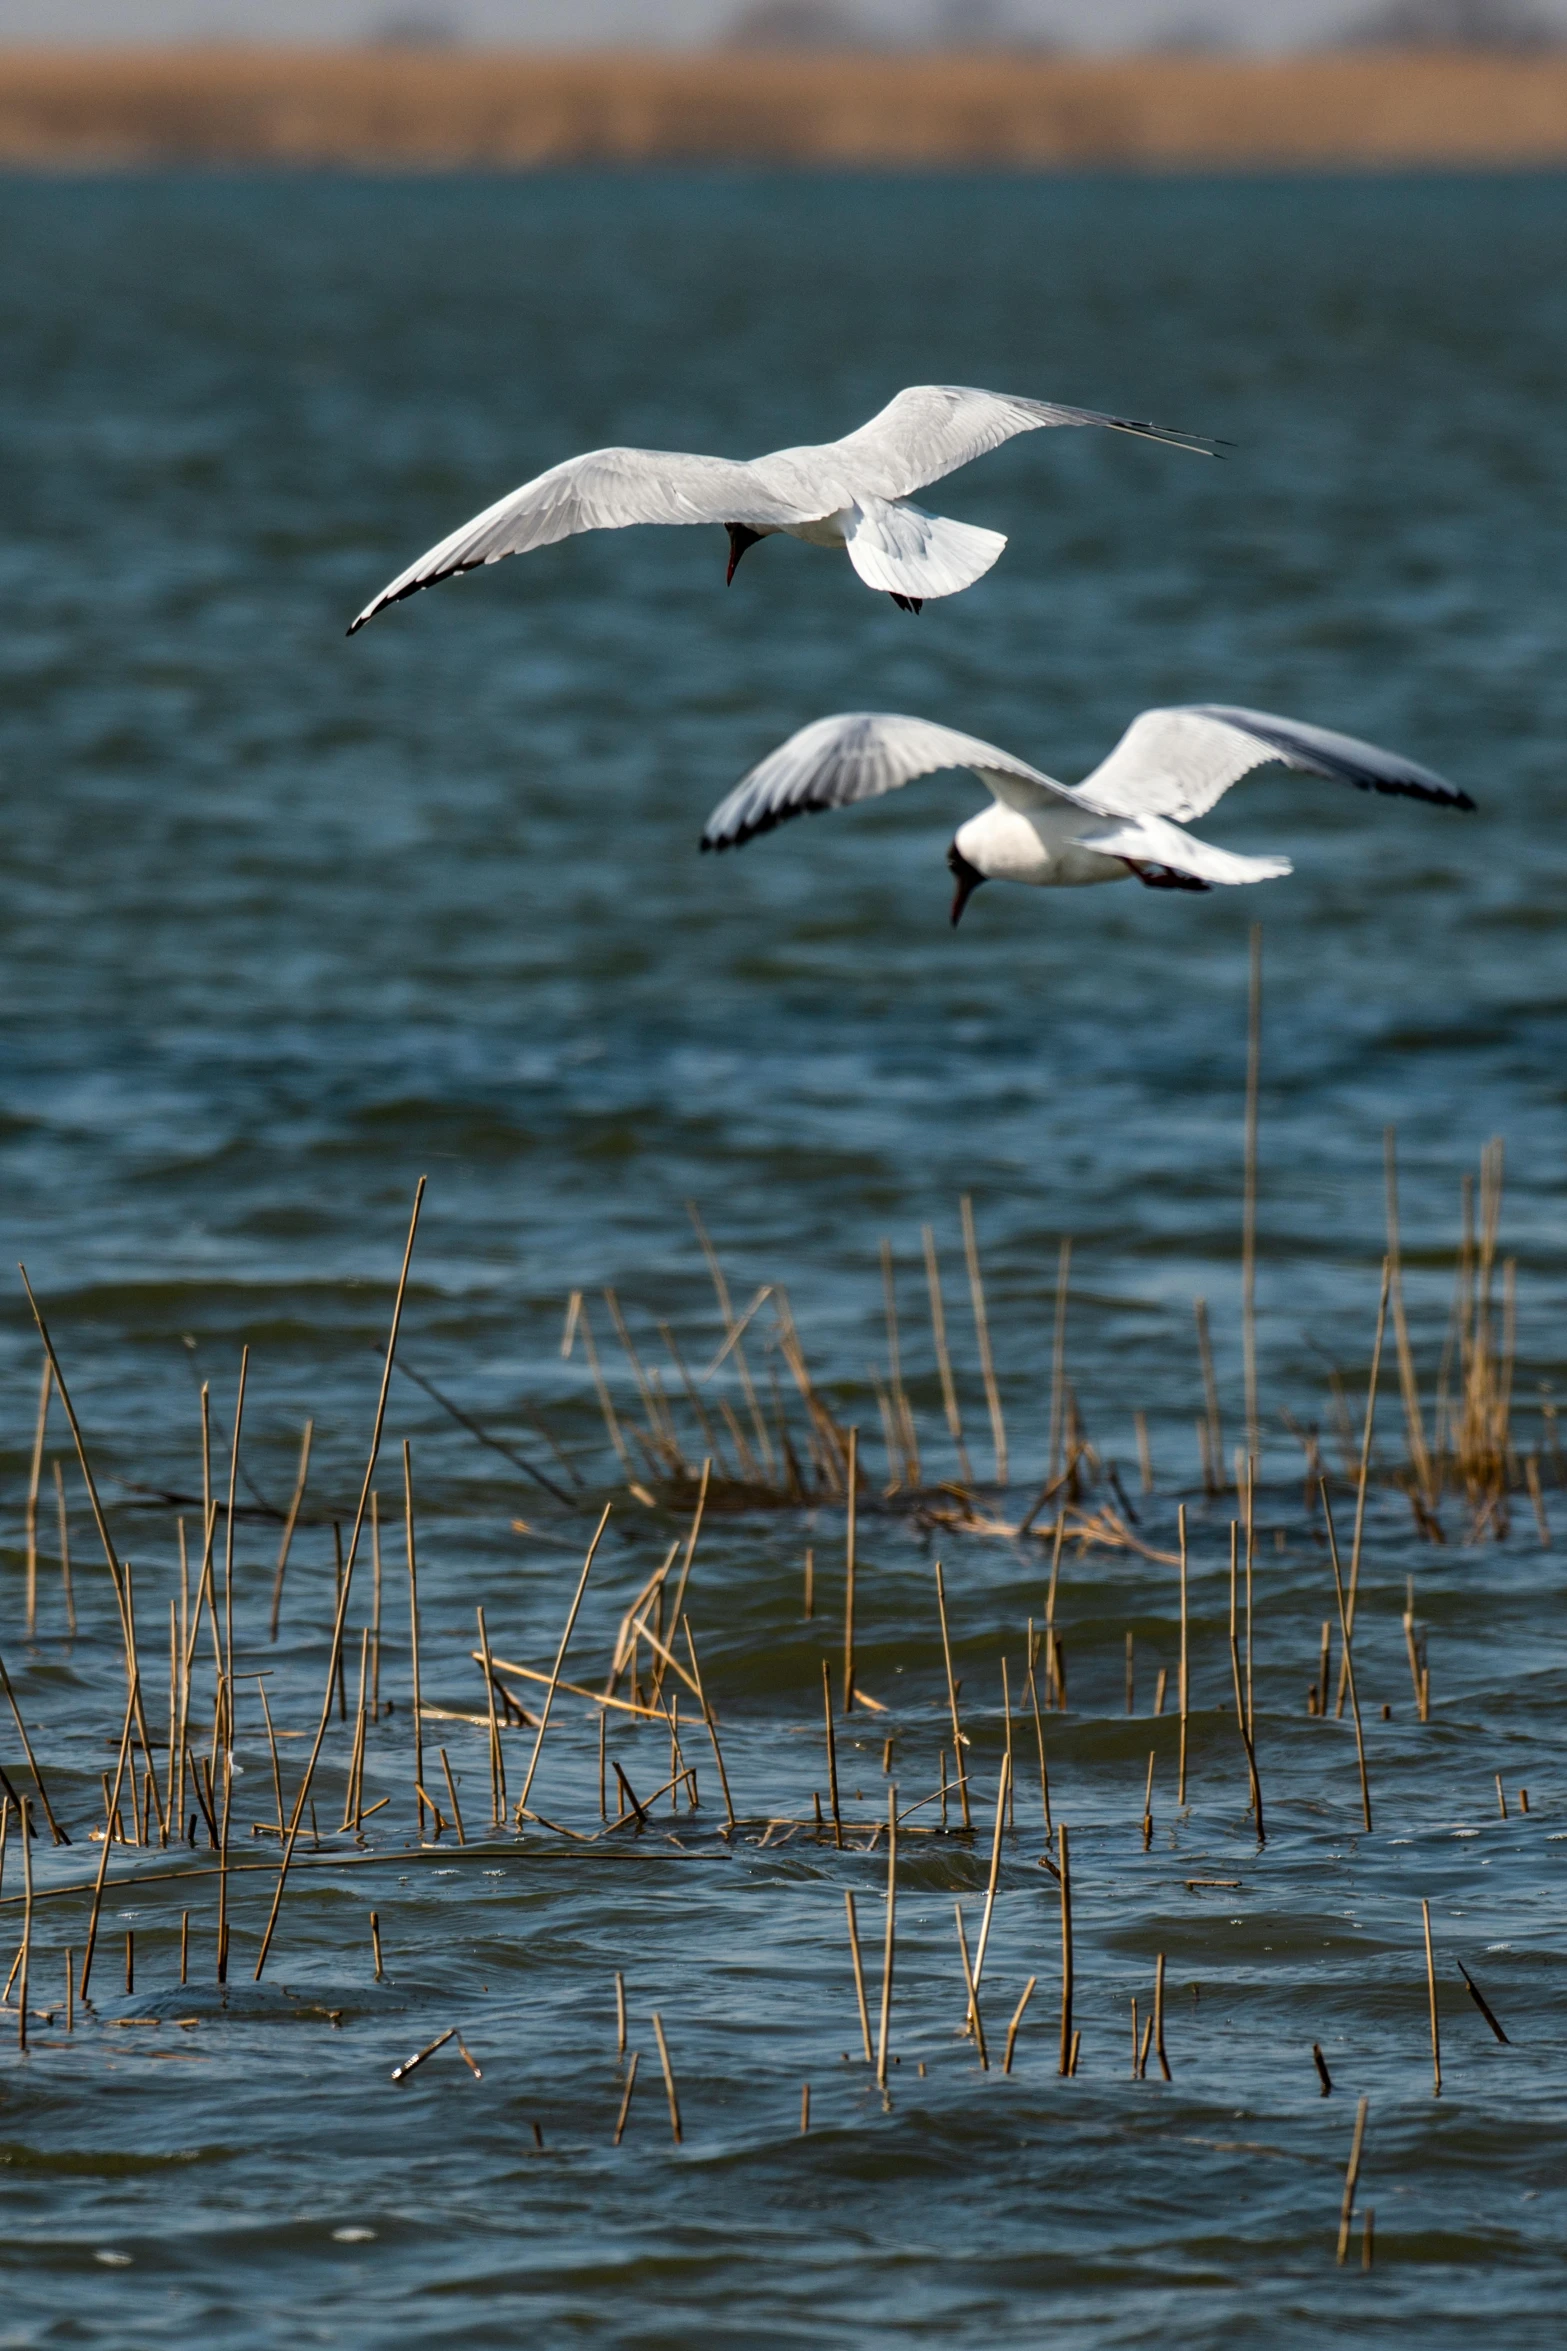 two seagulls are flying over water near weeds